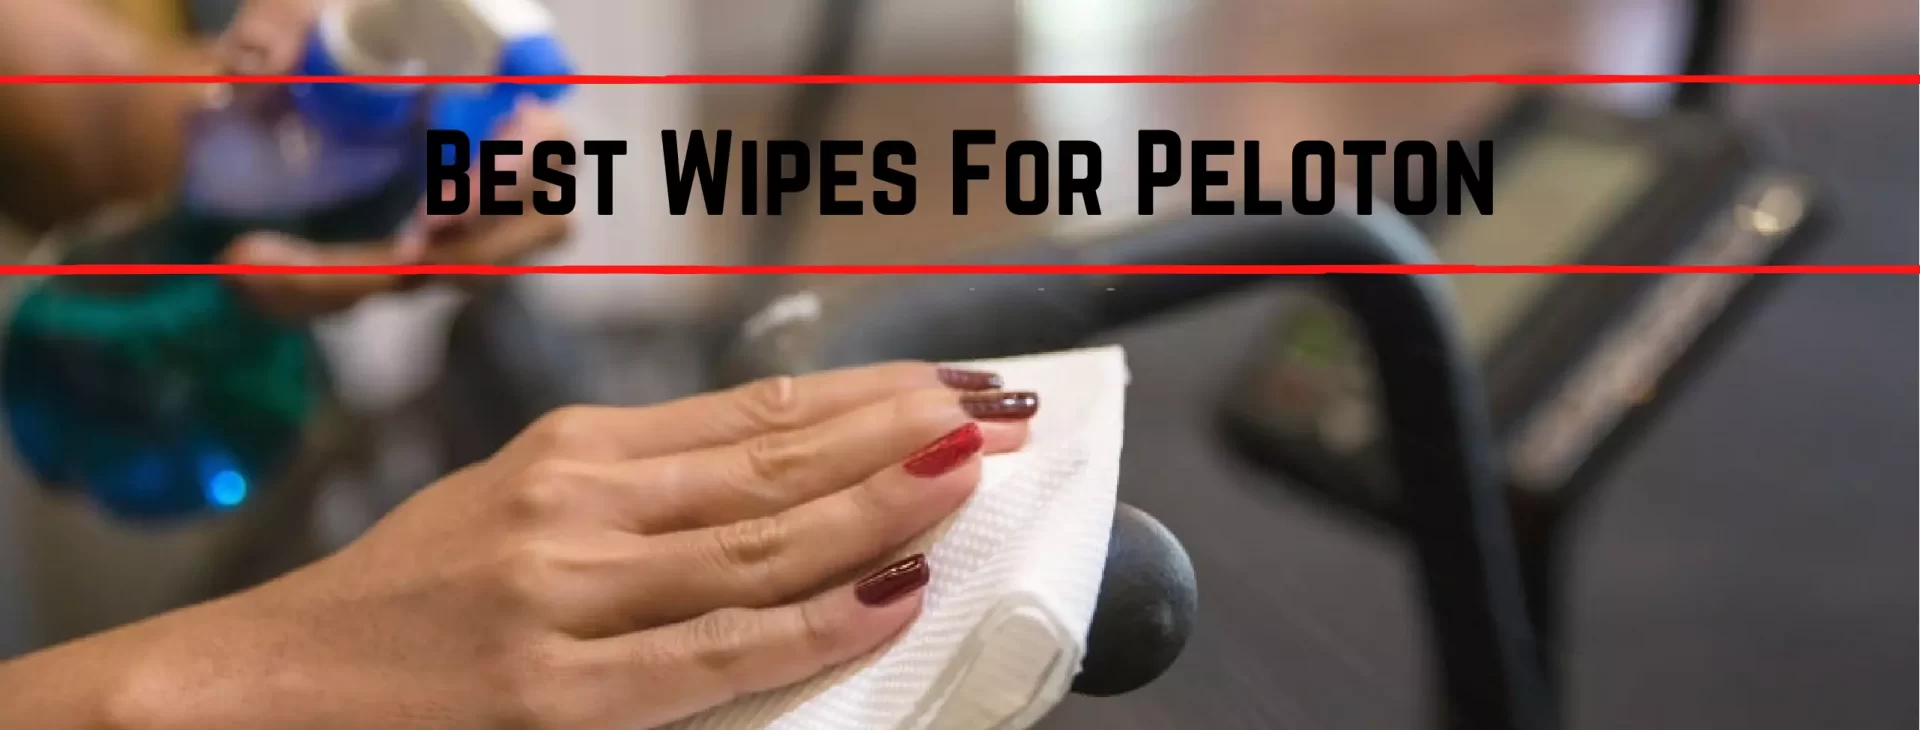 Best Wipes For Peloton,best wipes to use on a peloton,best wipes for cleaning peloton,best wipes for peloton screen,Wipes For Peloton,method wipes for peloton,best cleaning wipes for peloton,best wipes for after workout,peloton screen wipes,can i use lysol wipes on my peloton,best wipes to use for peloton bike,clorox wipes peloton,peloton clorox wipes,best wipes to clean peloton,best wipes for peloton bike